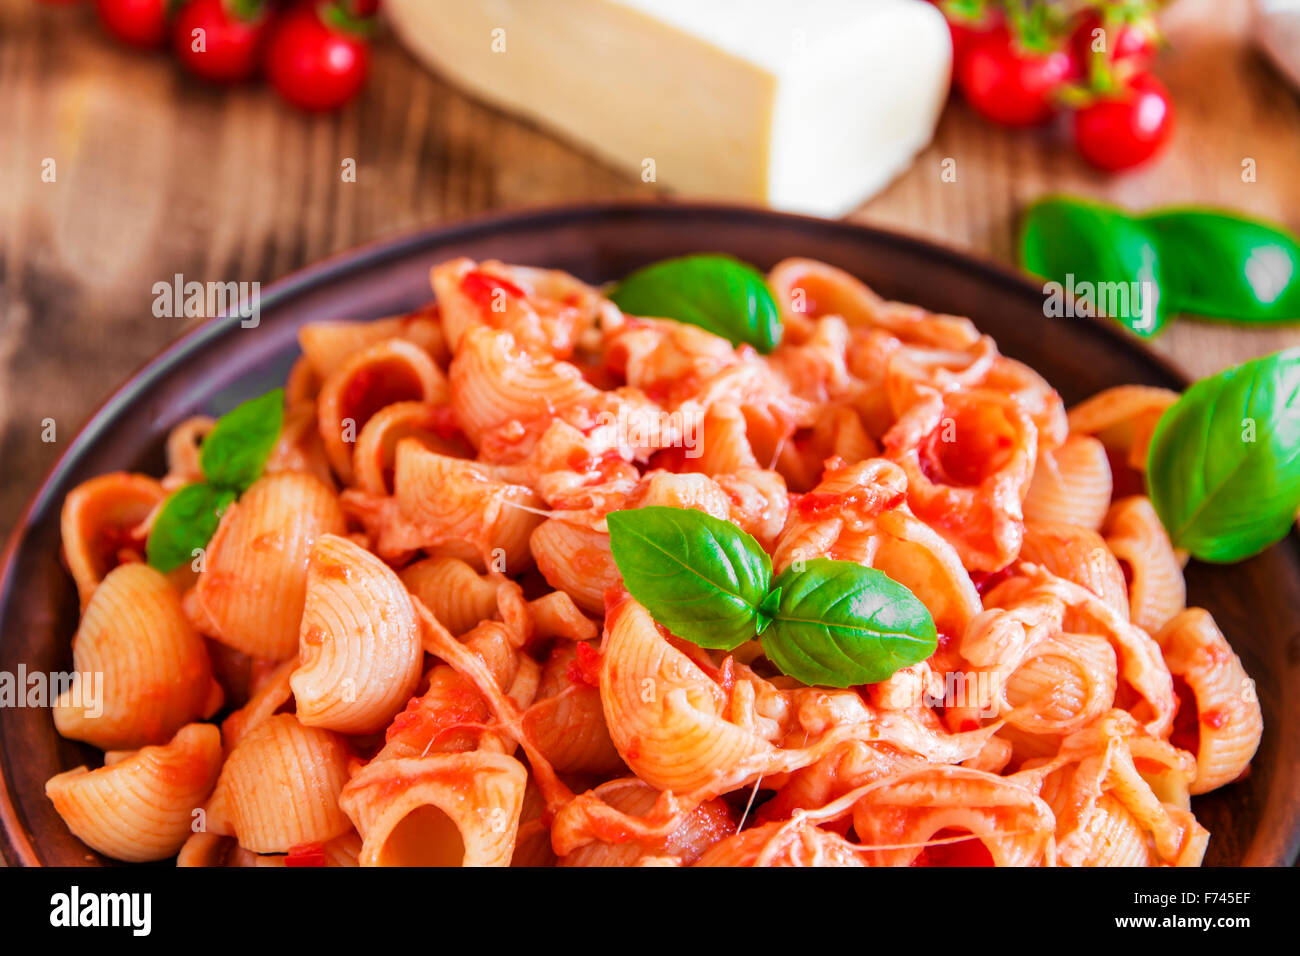 pasta with tomato sauce and cheese Stock Photo